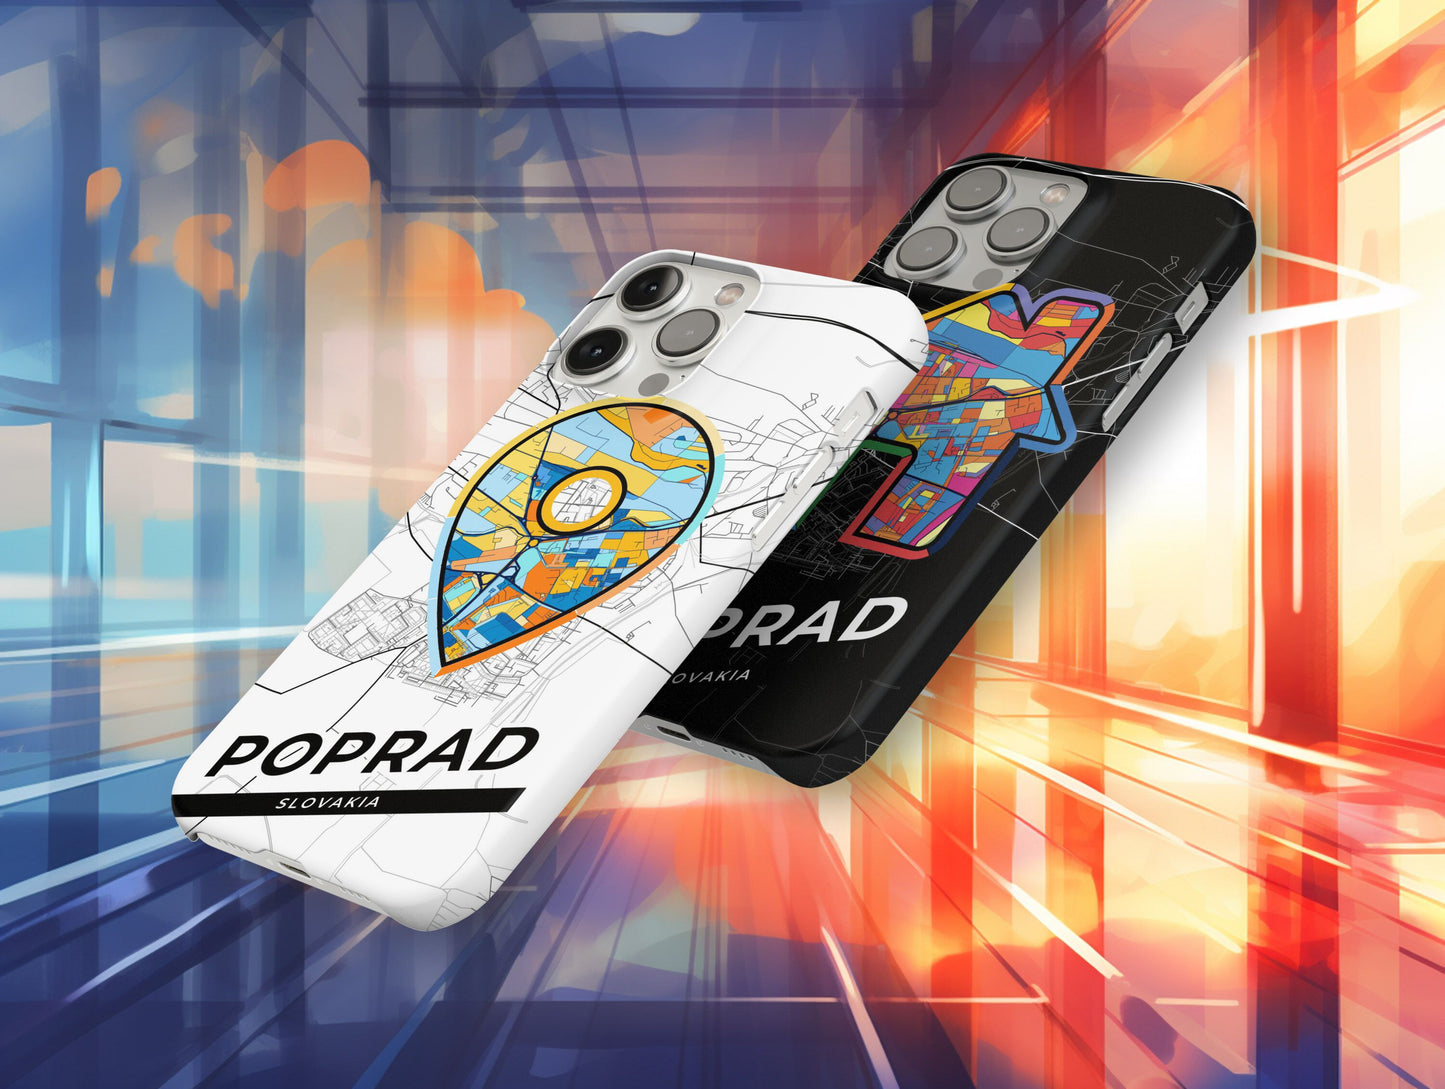 Poprad Slovakia slim phone case with colorful icon. Birthday, wedding or housewarming gift. Couple match cases.